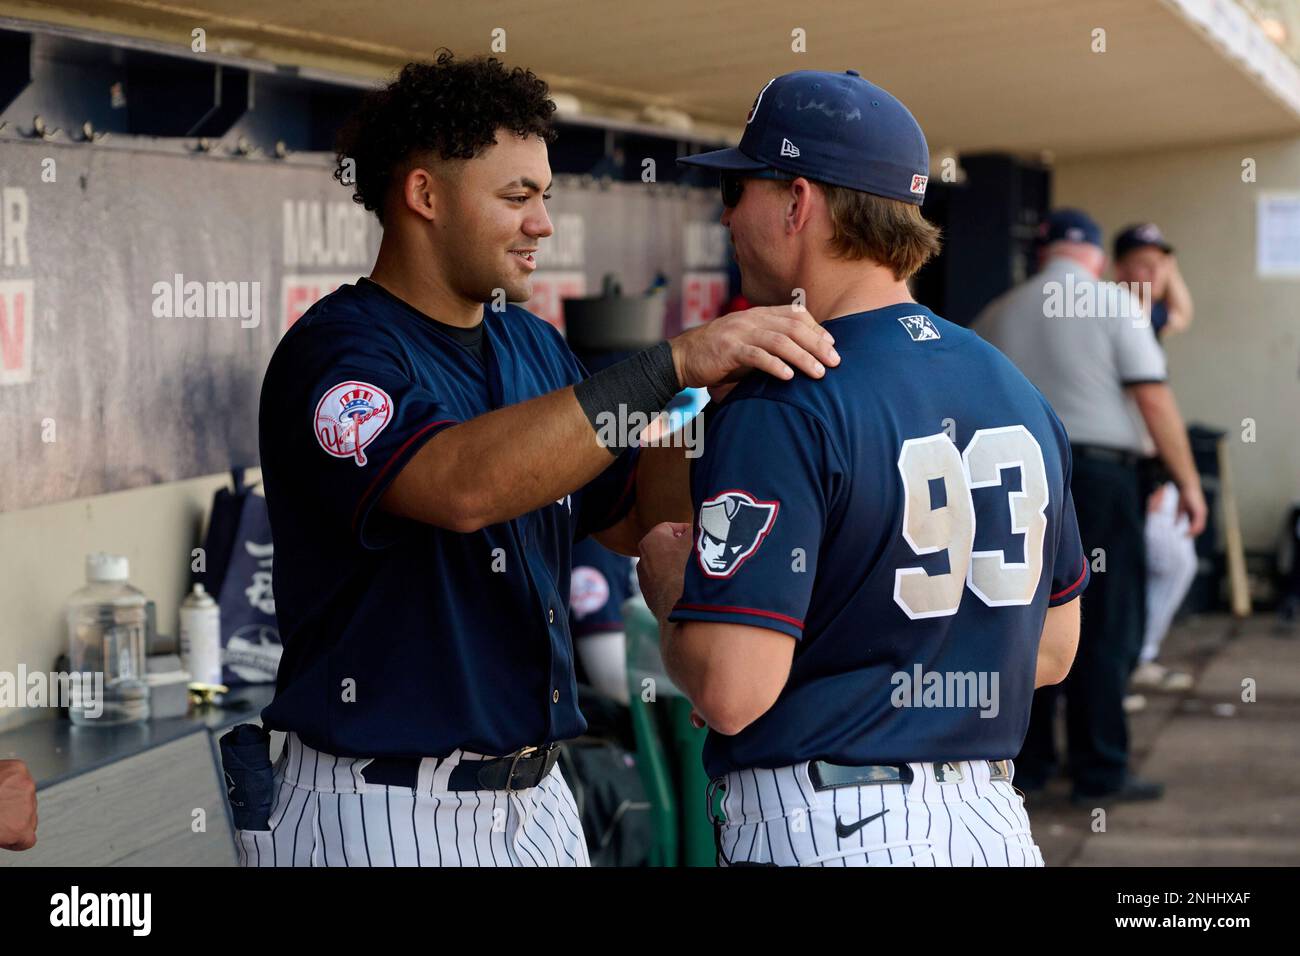 Somerset Patriots Jasson Dominguez (32) talks with coach Aaron Bossi (93) during an Eastern League baseball game against the Portland Sea Dogs on September 18, 2022 at TD Bank Ballpark in Bridgewater